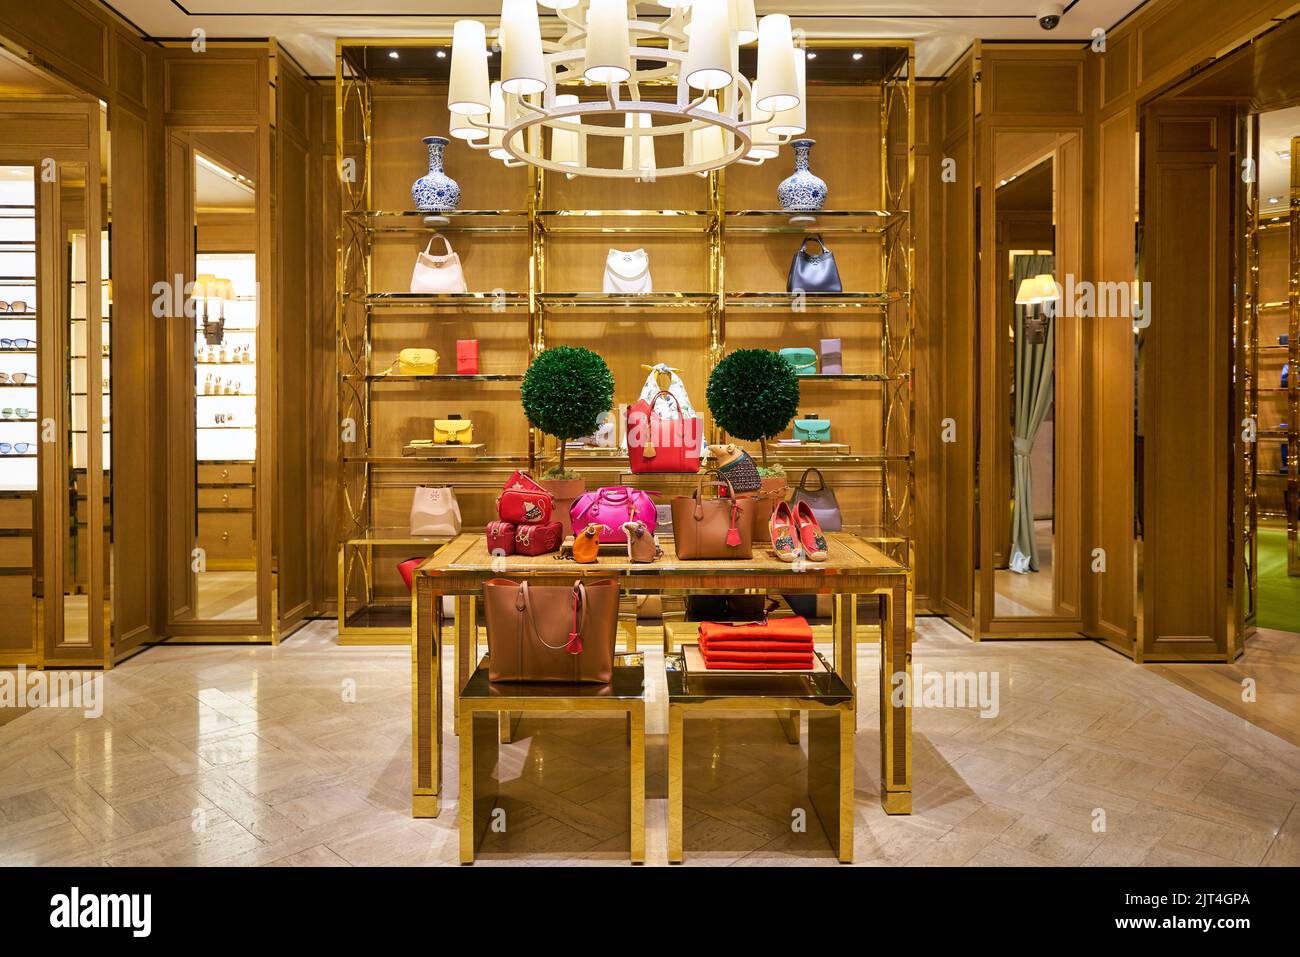 SINGAPORE - JANUARY 20, 2020: interior shot of Tory Burch store the Shoppes at Marina Bay Sands. Tory Burch LLC is an American fashion label. Stock Photo